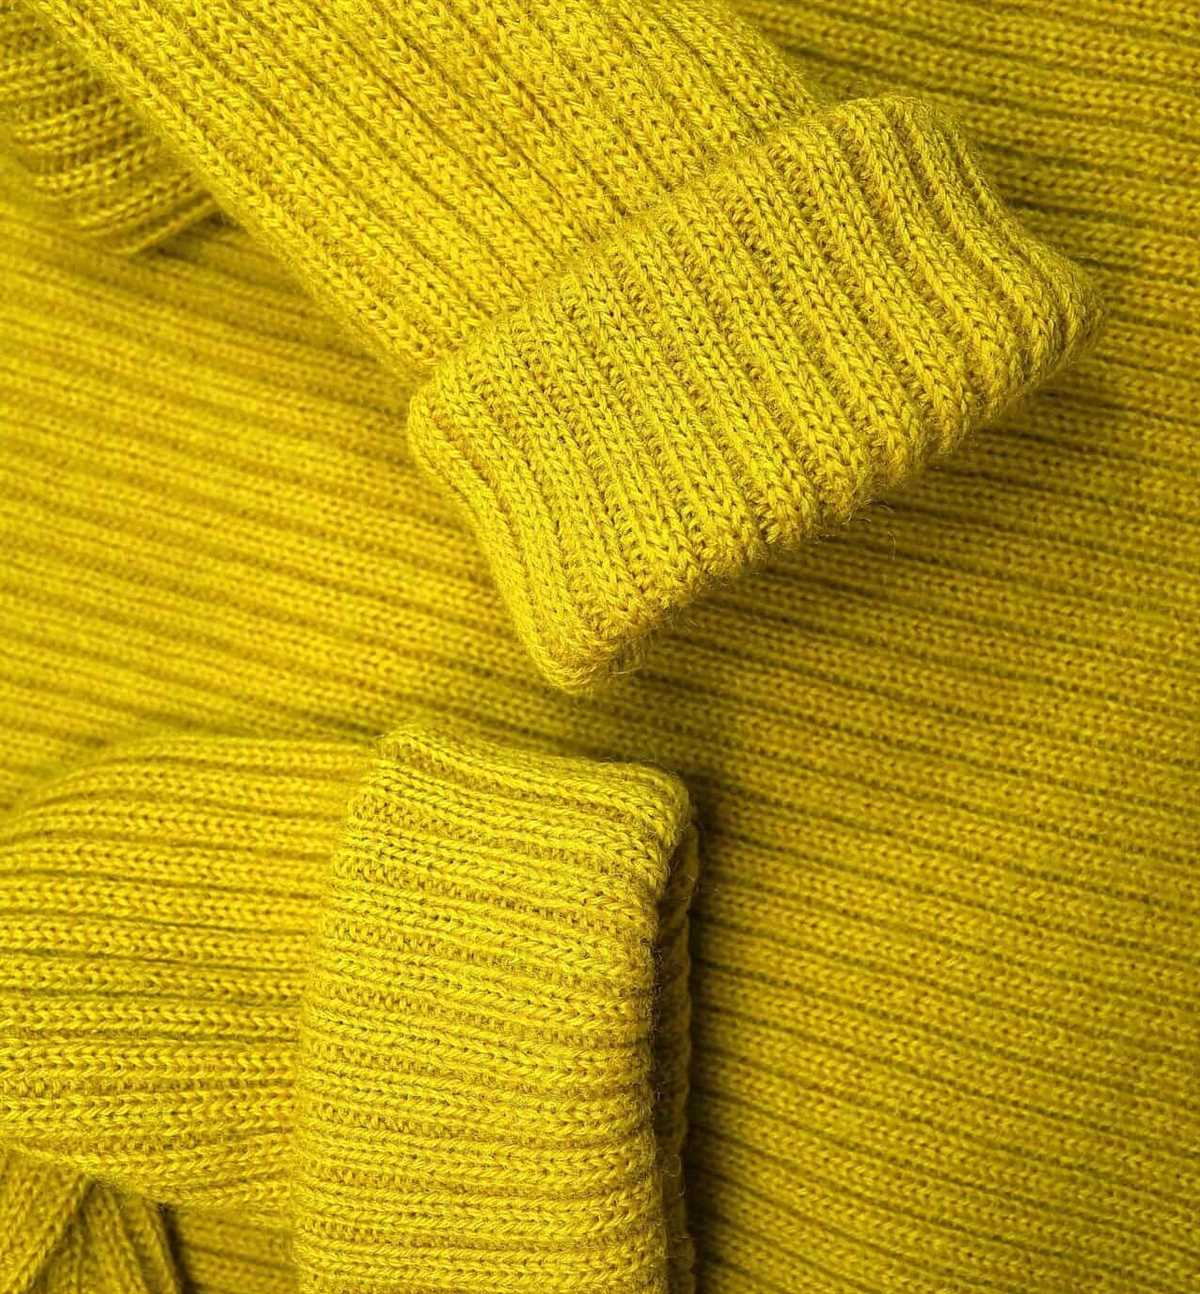 Misconception 5: Lambswool is itchy and uncomfortable